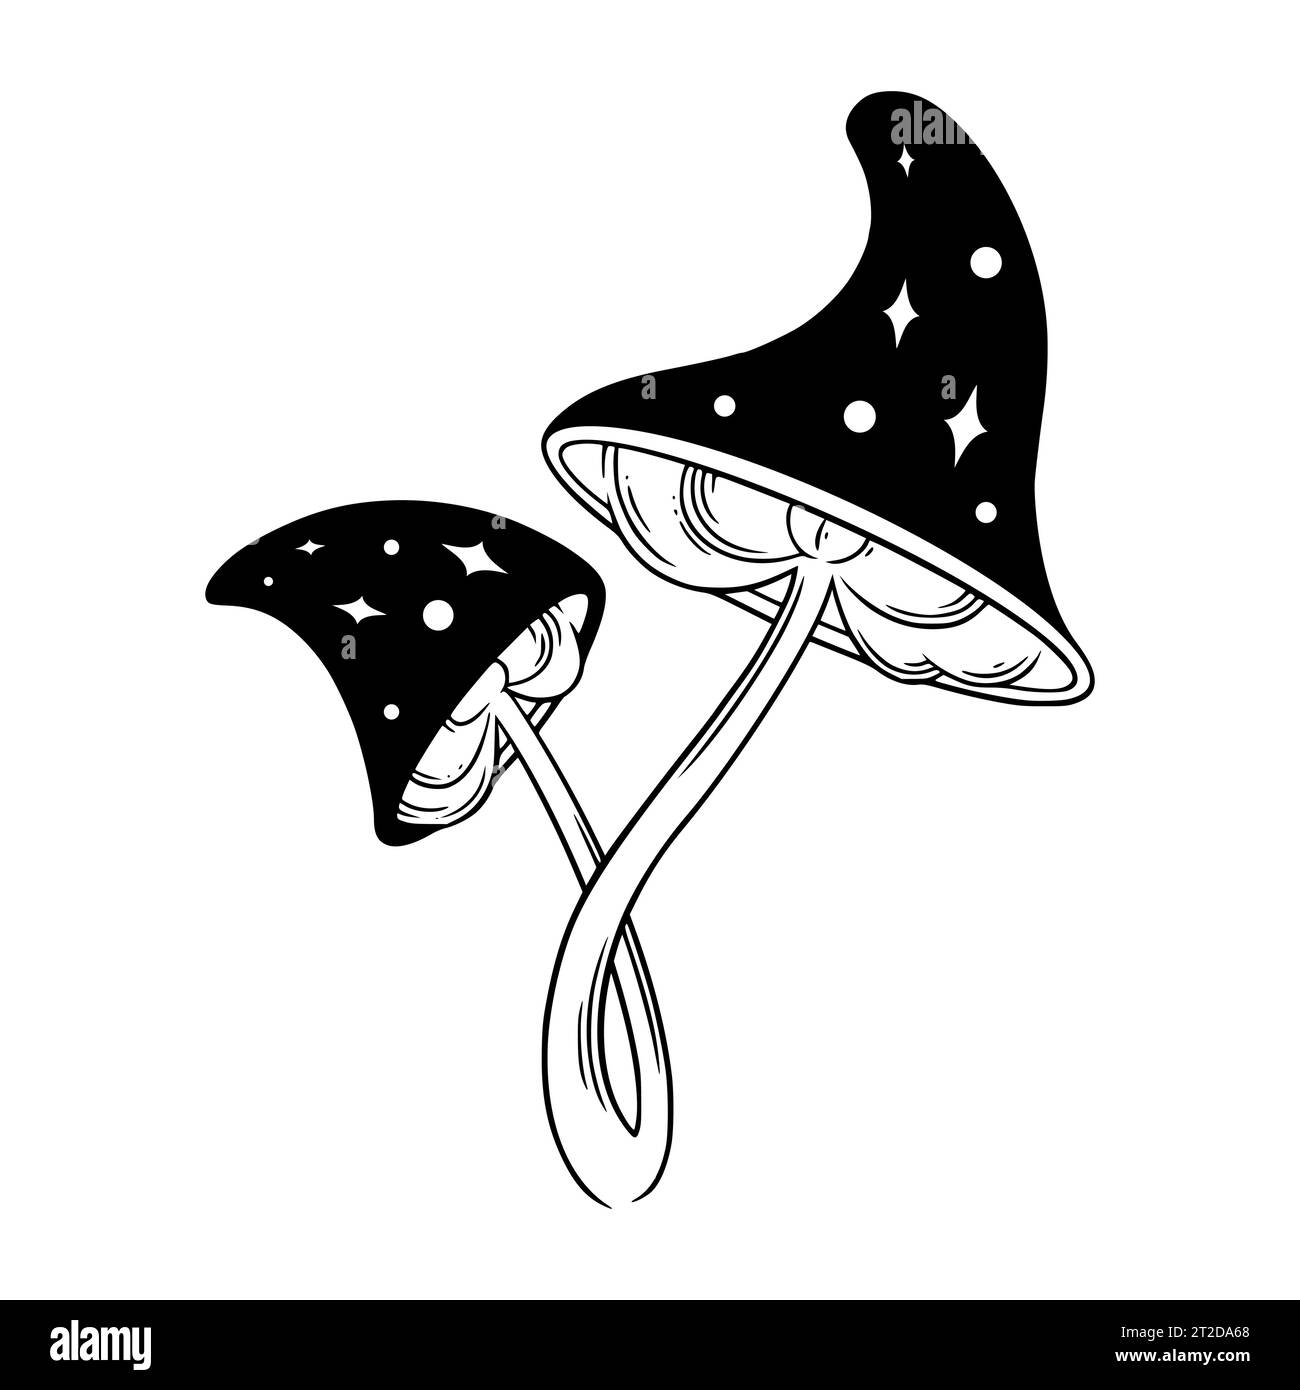 Poison mushrooms. Psychedelic magic mushrooms for wicca rituals. Vector illustration isolated in white background Stock Vector